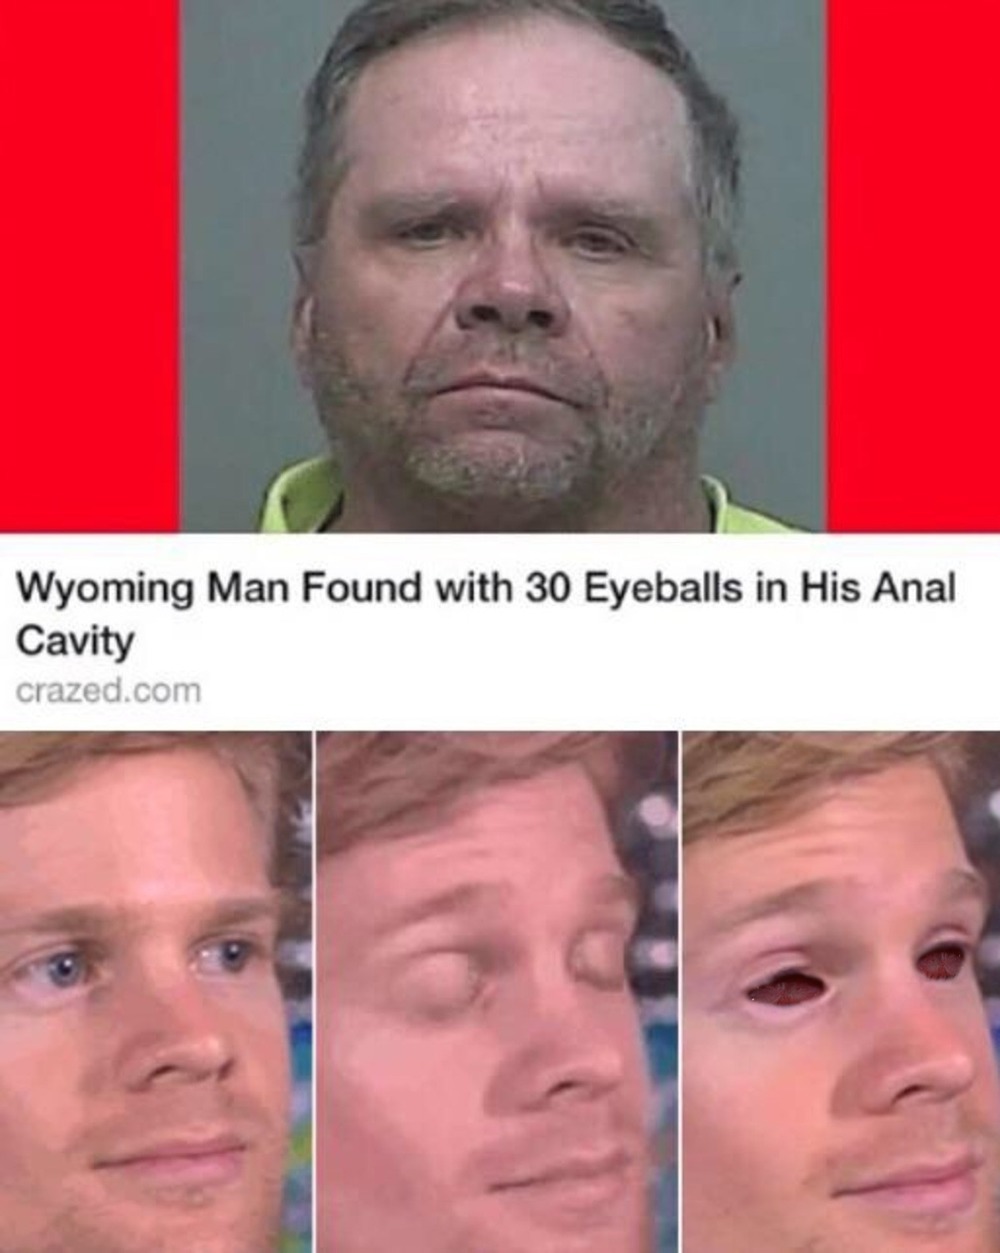 wyoming man found with 30 eyeballs in his anal cavity - Wyoming Man Found with 30 Eyeballs in His Anal Cavity crazed.com